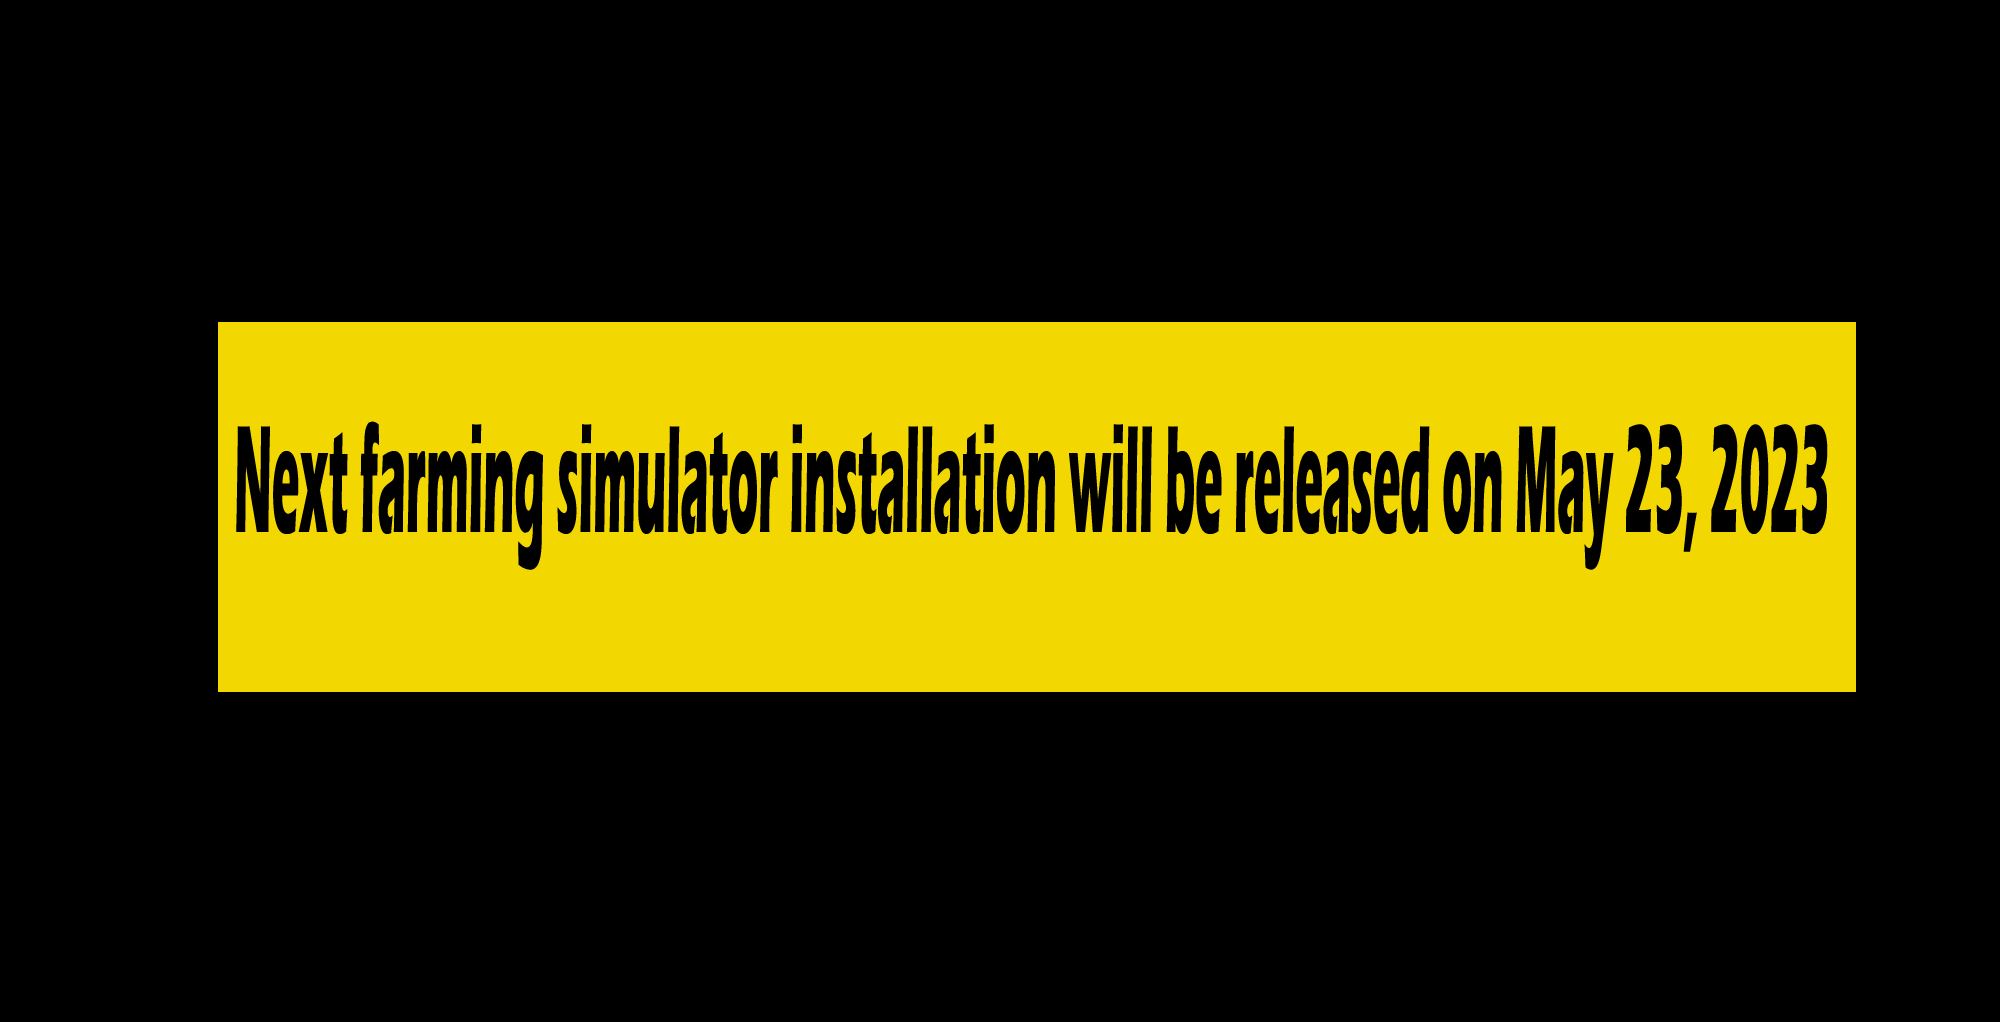 Next farming simulator installation will be released on May 23, 2023